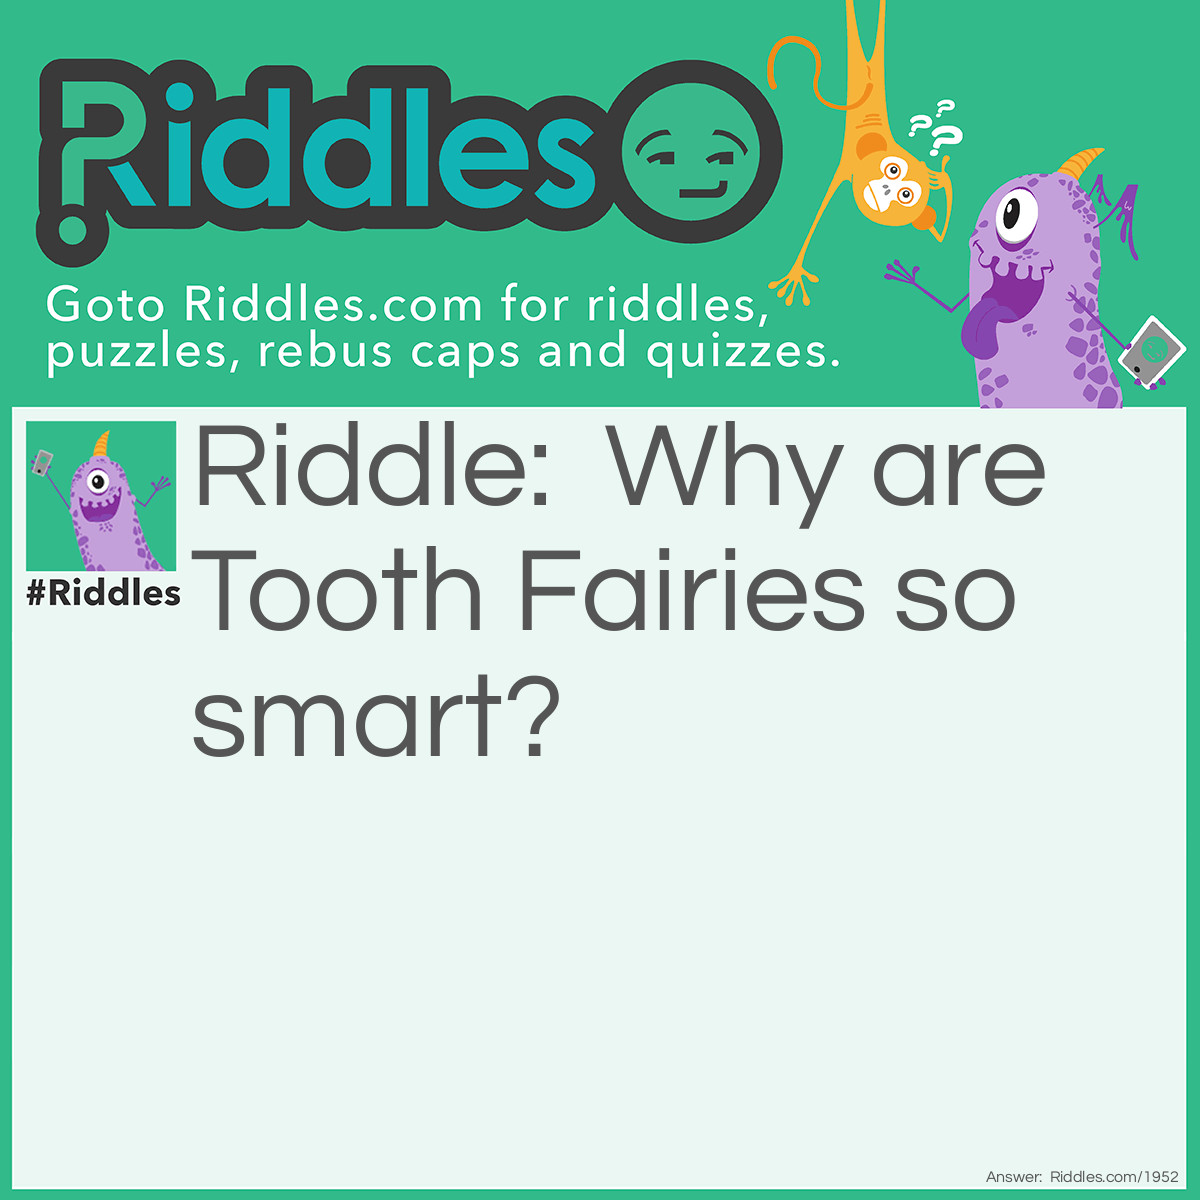 Riddle: Why are Tooth Fairies so smart? Answer: They gather a lot of wisdom teeth.